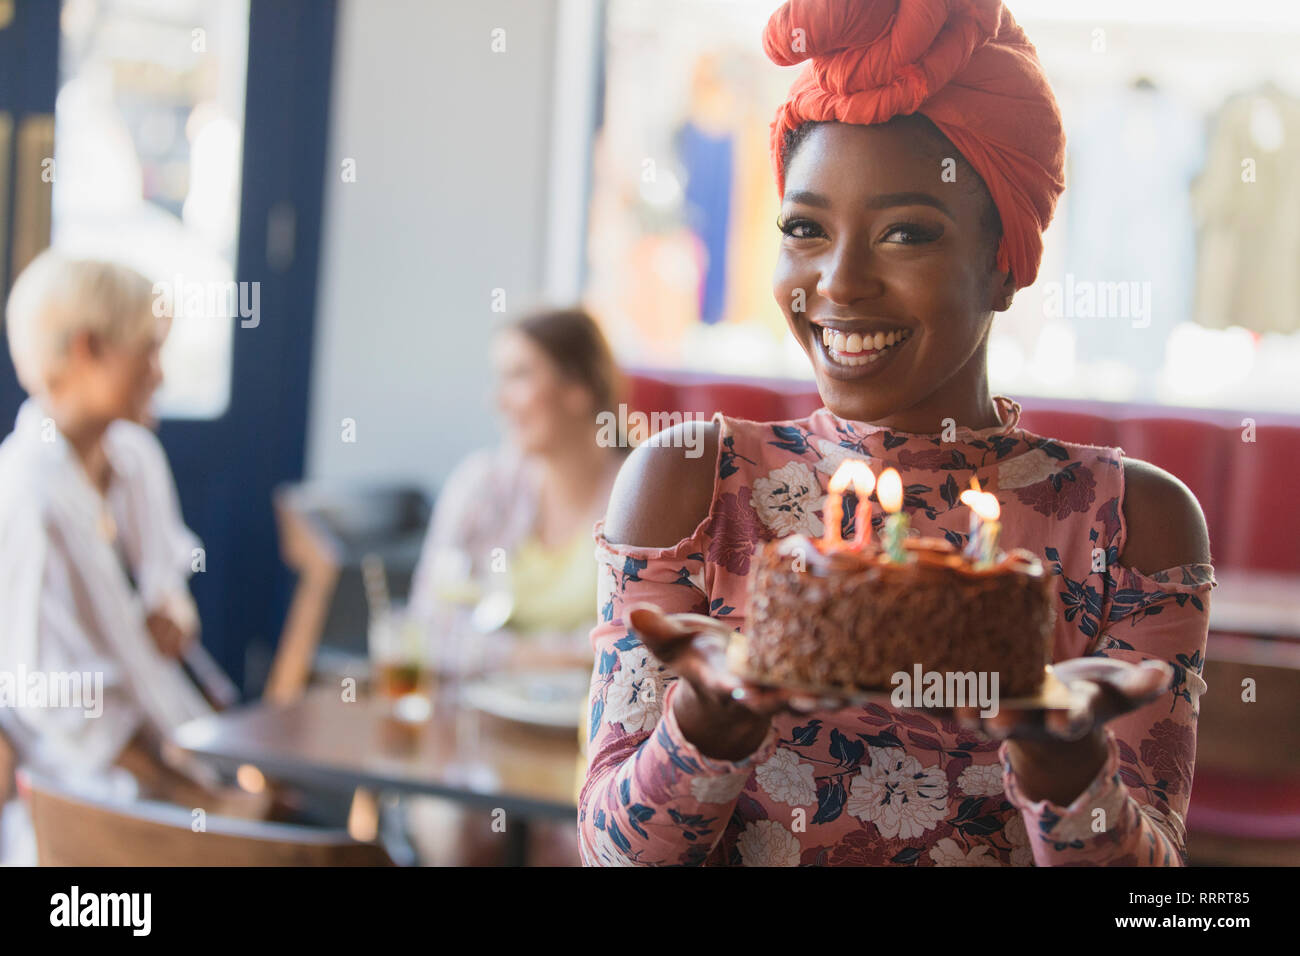 Portrait smiling, confident young woman holding birthday cake with candles Stock Photo